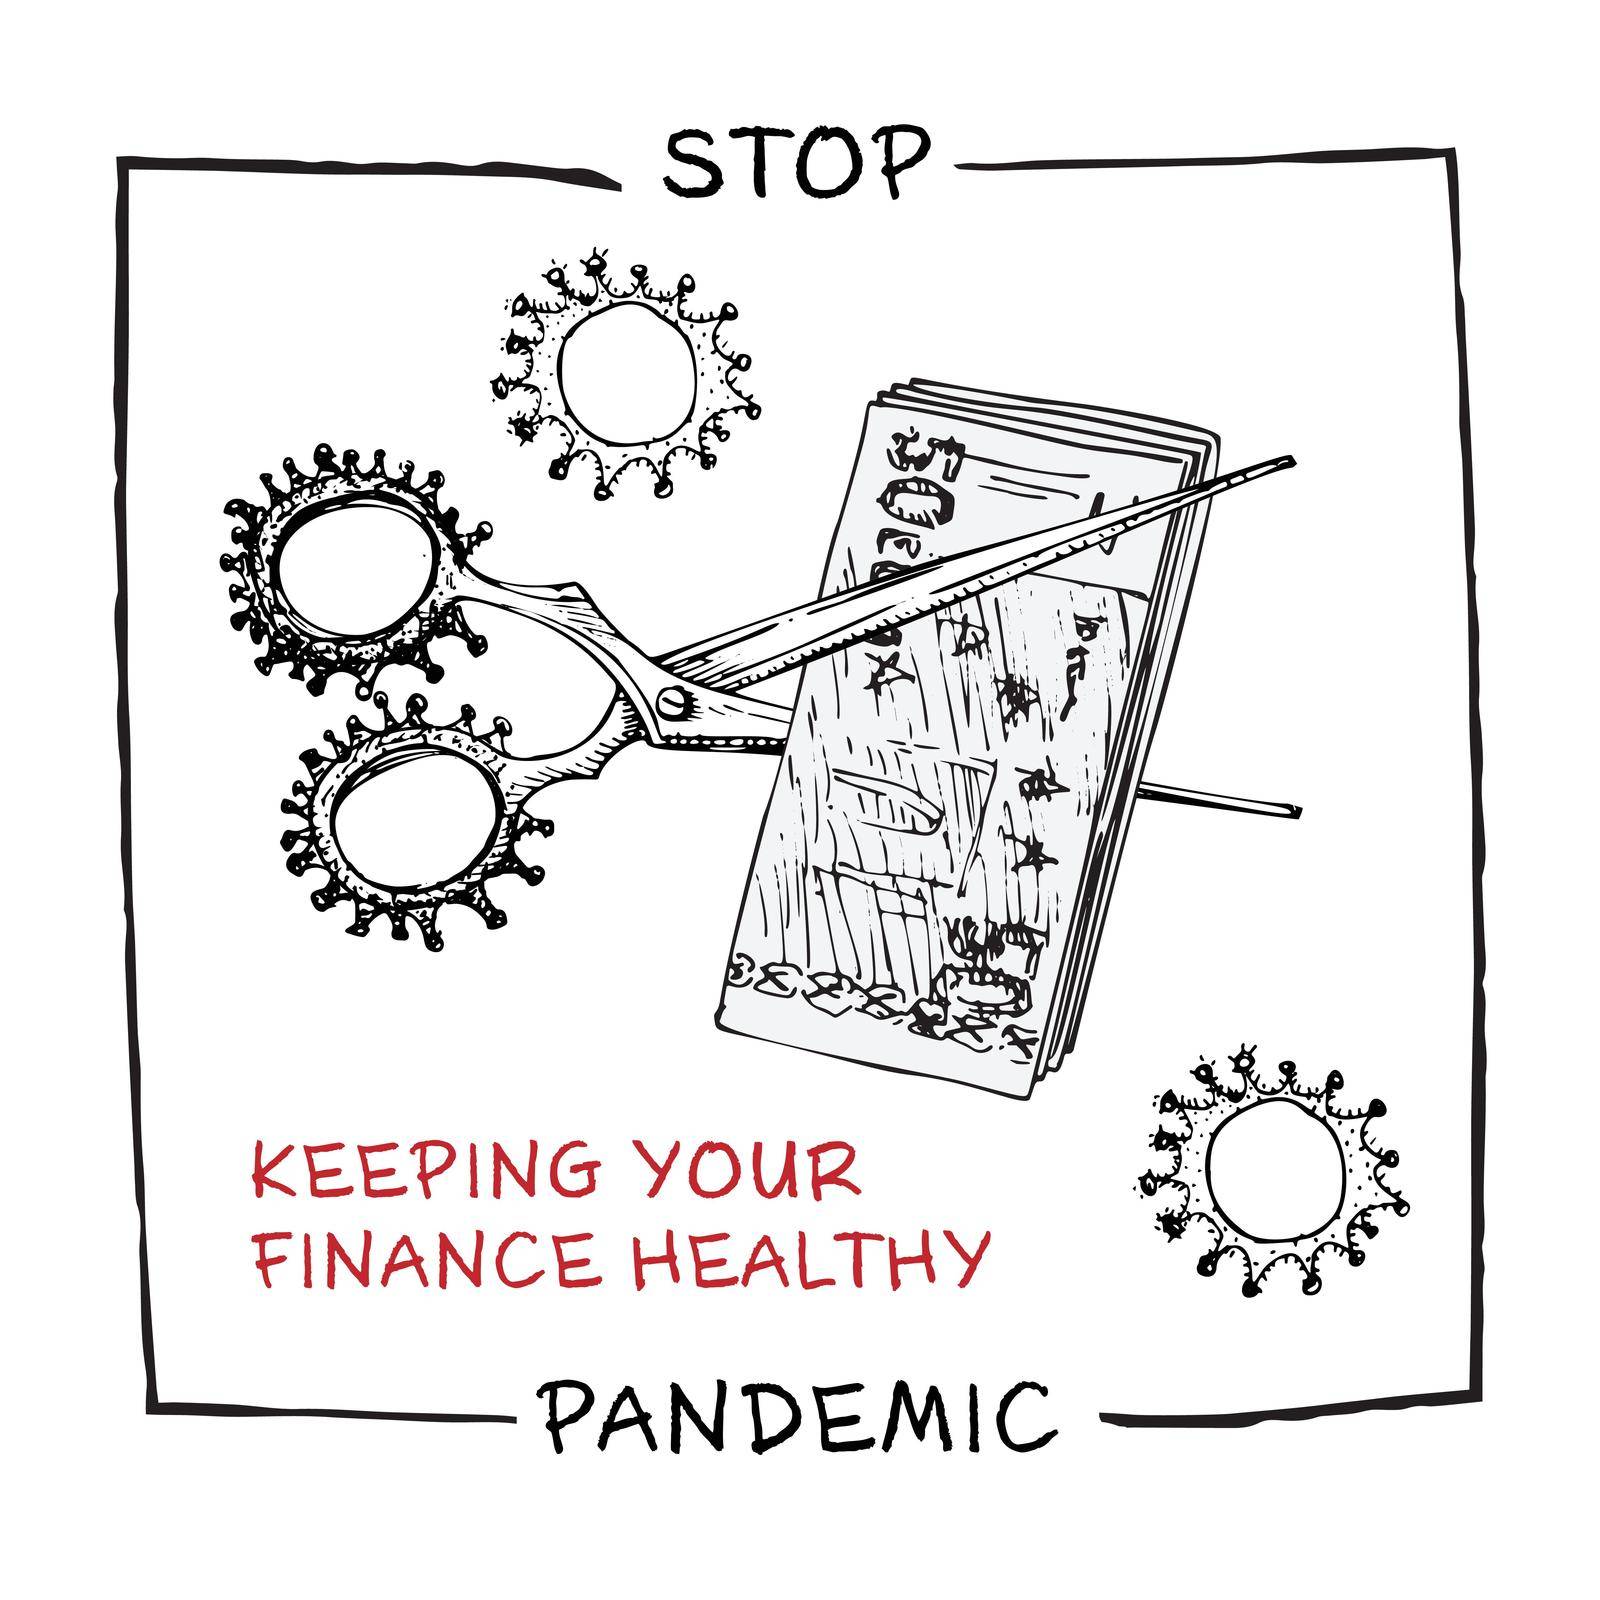 Design concept of economic and financial information agitational poster against coronavirus epidemic with text Stop pandemic Keep your finance healthy Sketch style by zimages